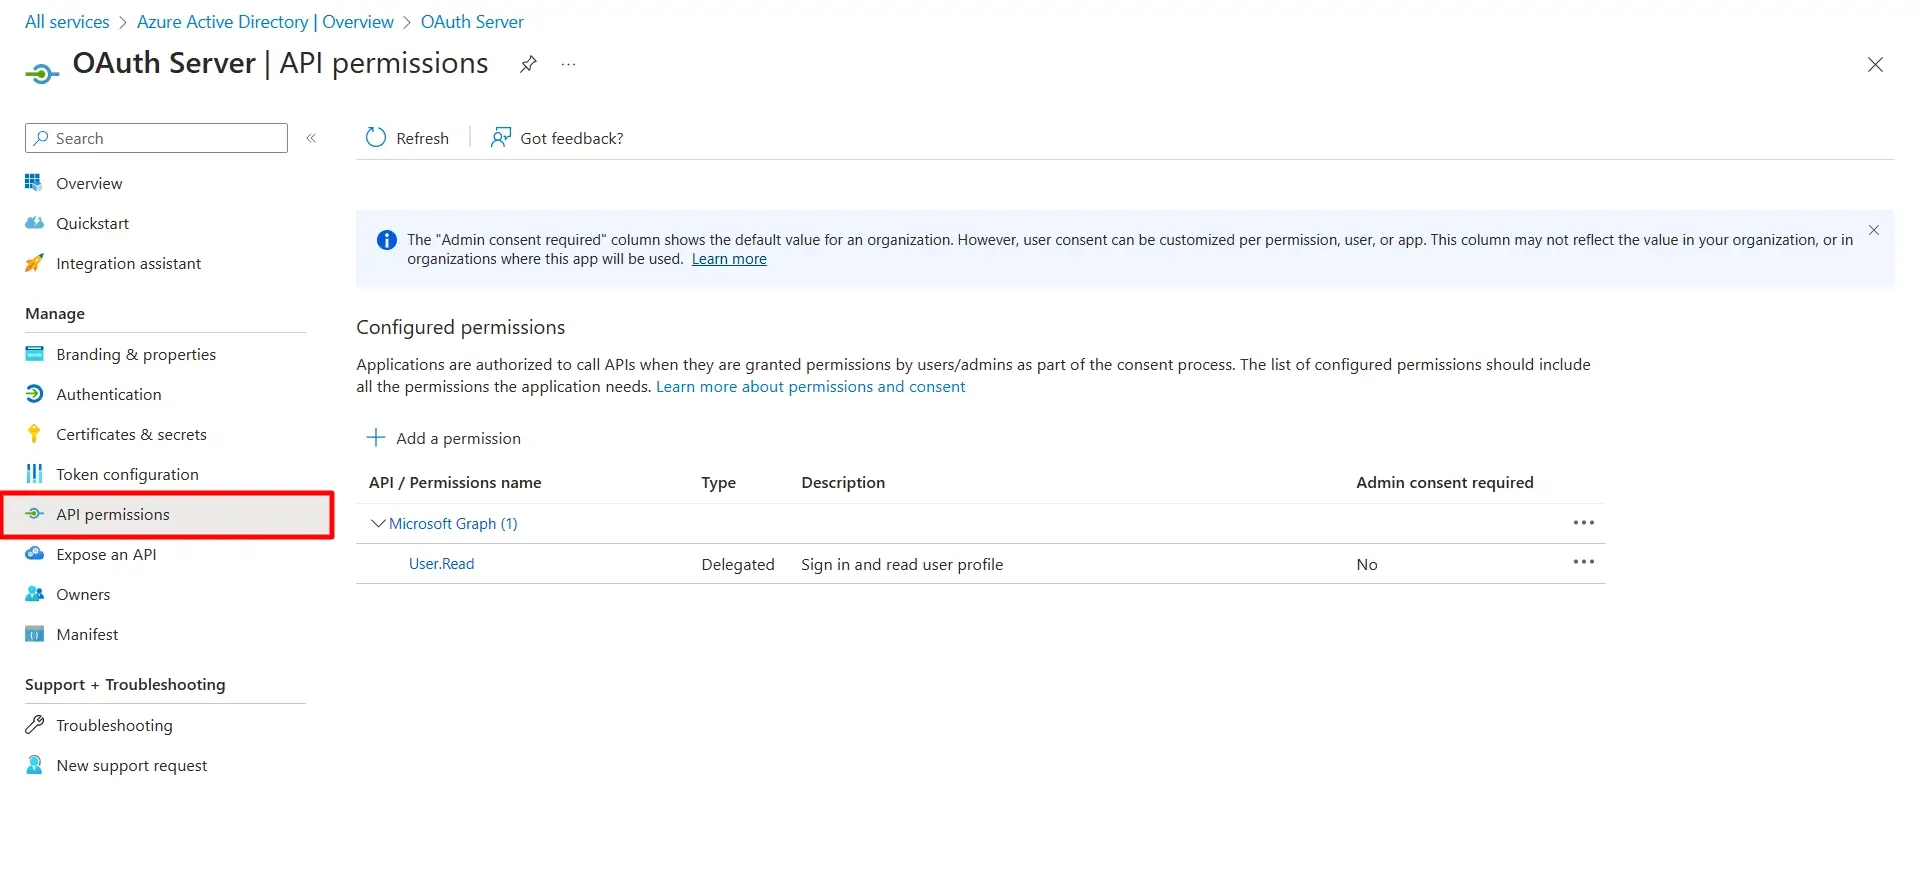  Azure AD Single Sign-On (SSO) OAuth/OpenID